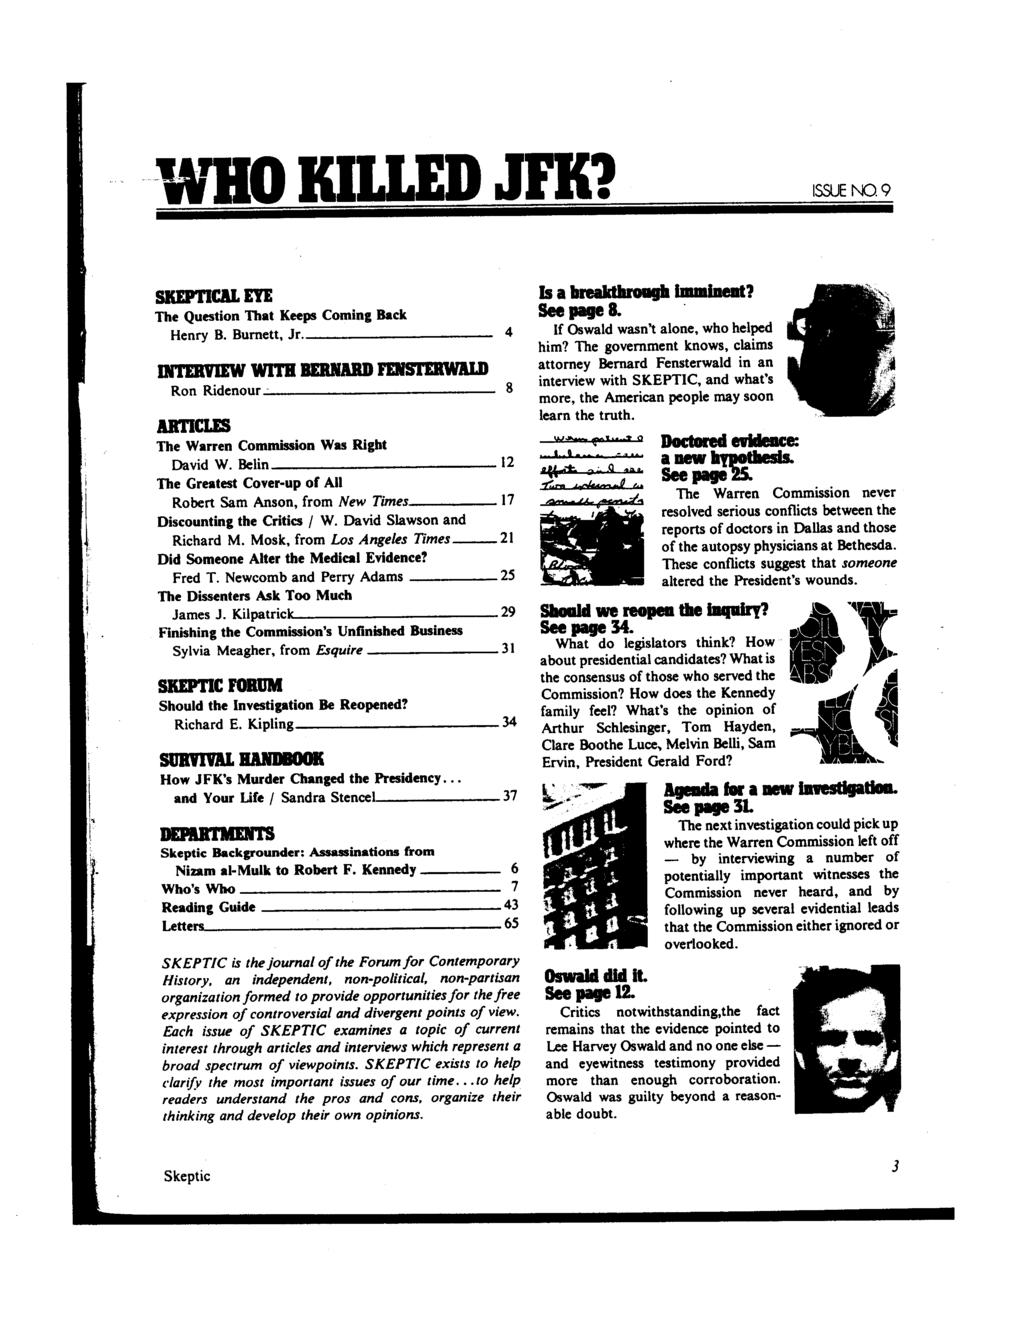 WHO KILLED JFK? ISSUE NO 9 SKEPTICAL EYE The Question That Keeps Coming Back Henry B.